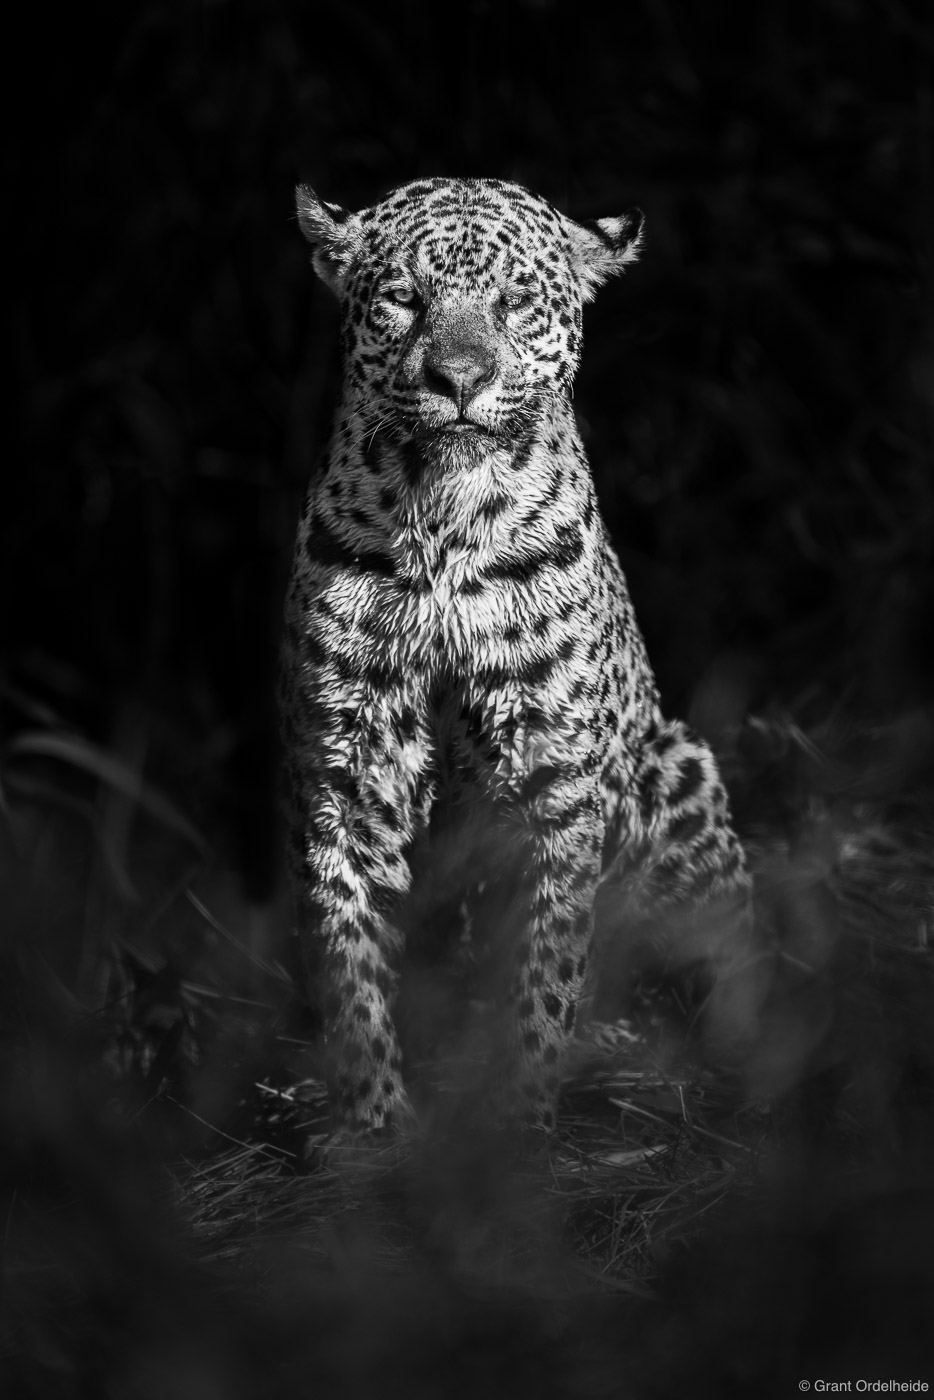 A jaguar named Patricia emerging from the shadows of the Pantanal.